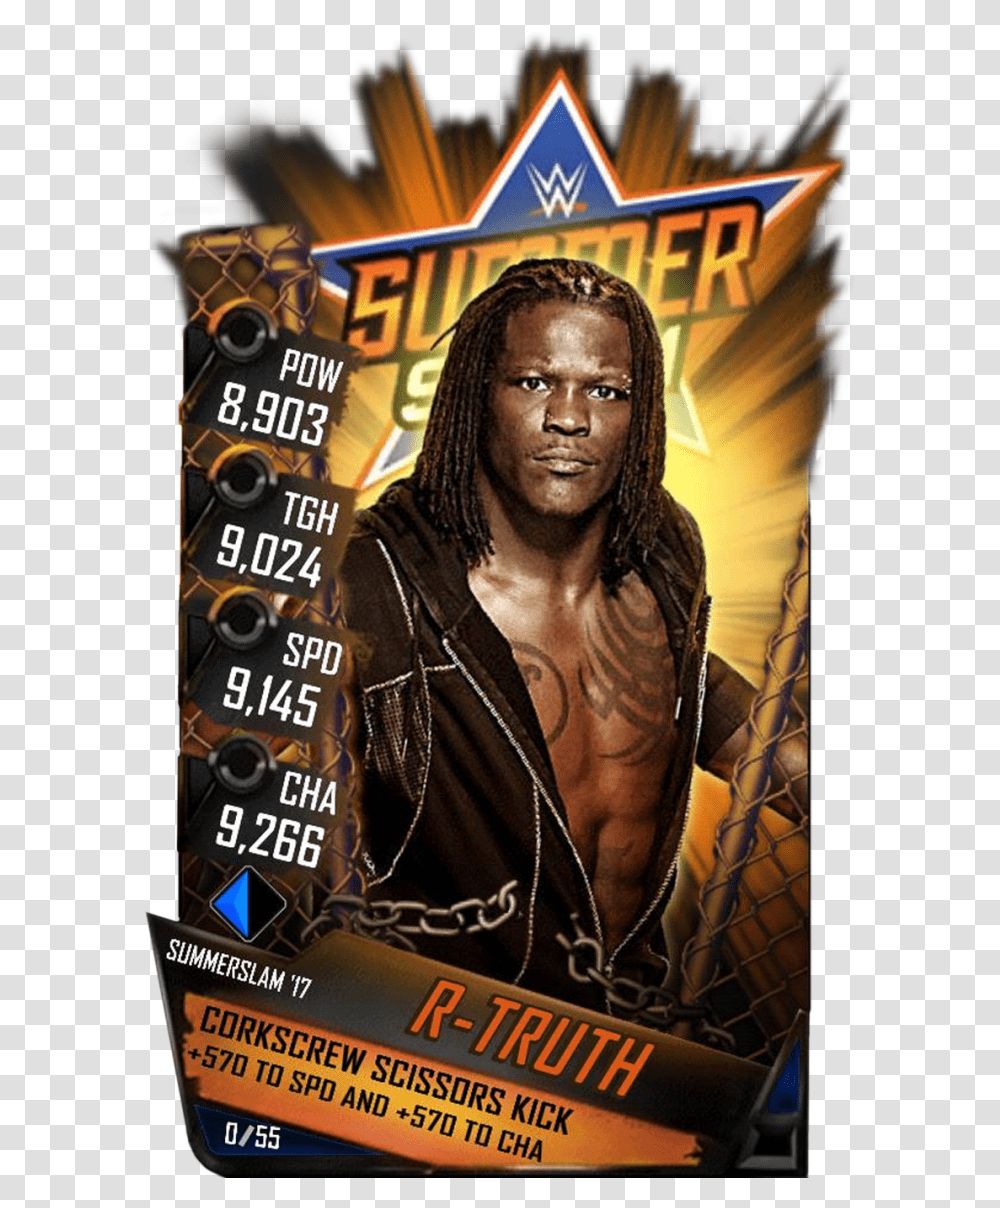 Wwe Supercard Summerslam 17 Cards Download Wwe Supercard Summerslam 17 Roman Reigns, Poster, Advertisement, Person, Skin Transparent Png